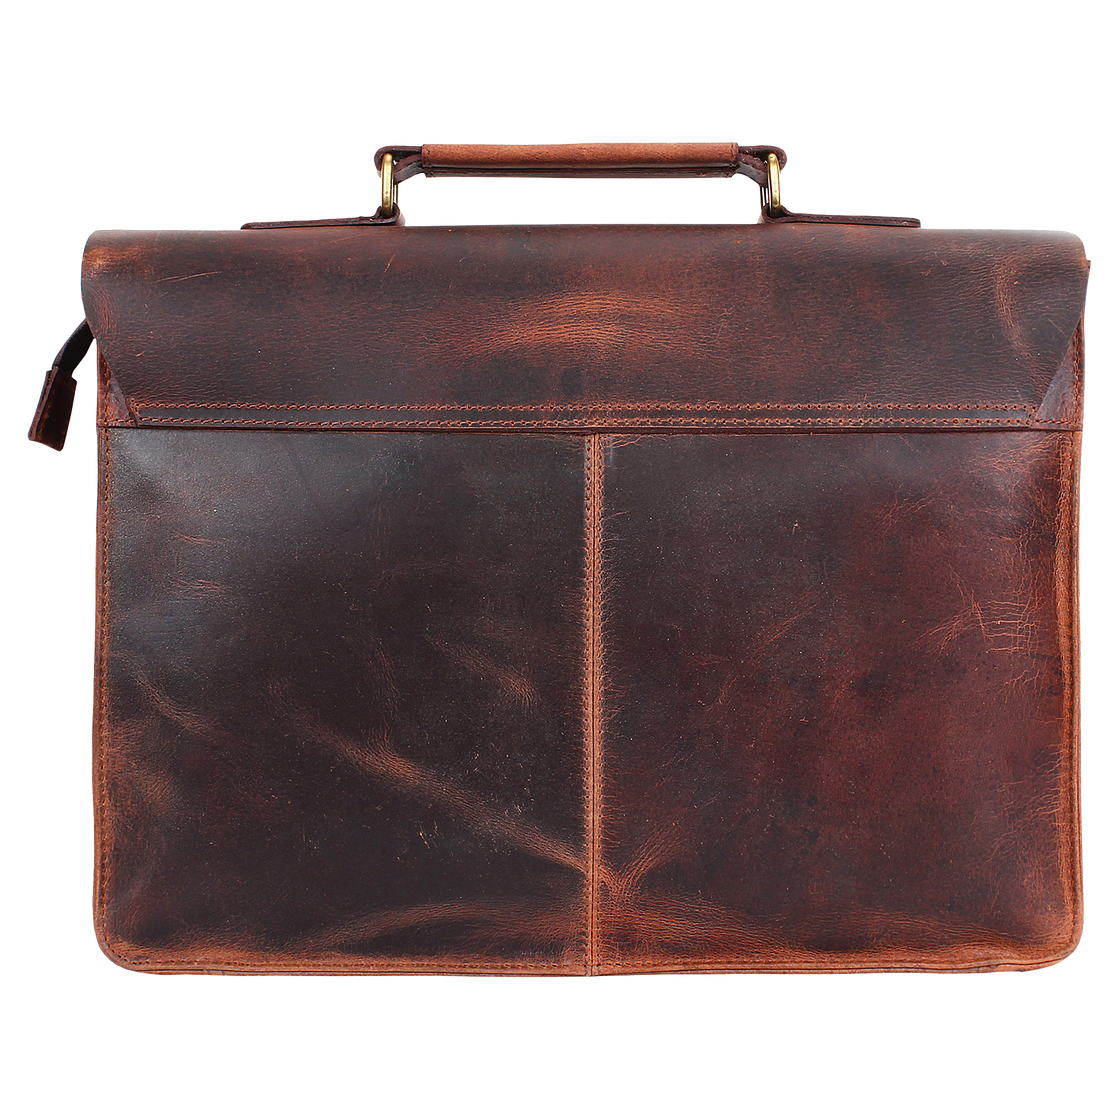 15 Inch Buffalo Leather Laptop Messenger Briefcase Bag (Mulberry)